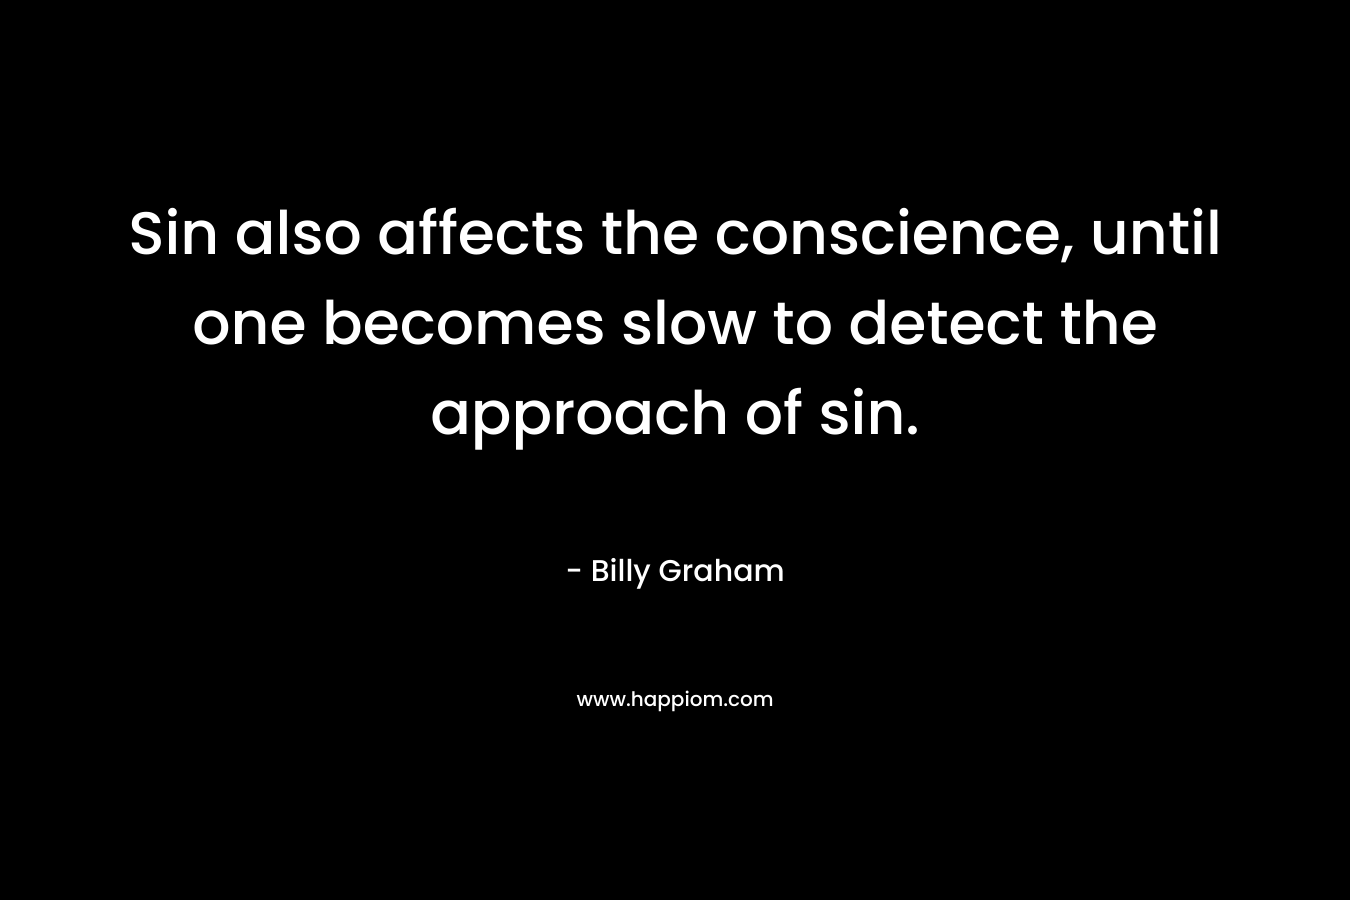 Sin also affects the conscience, until one becomes slow to detect the approach of sin.